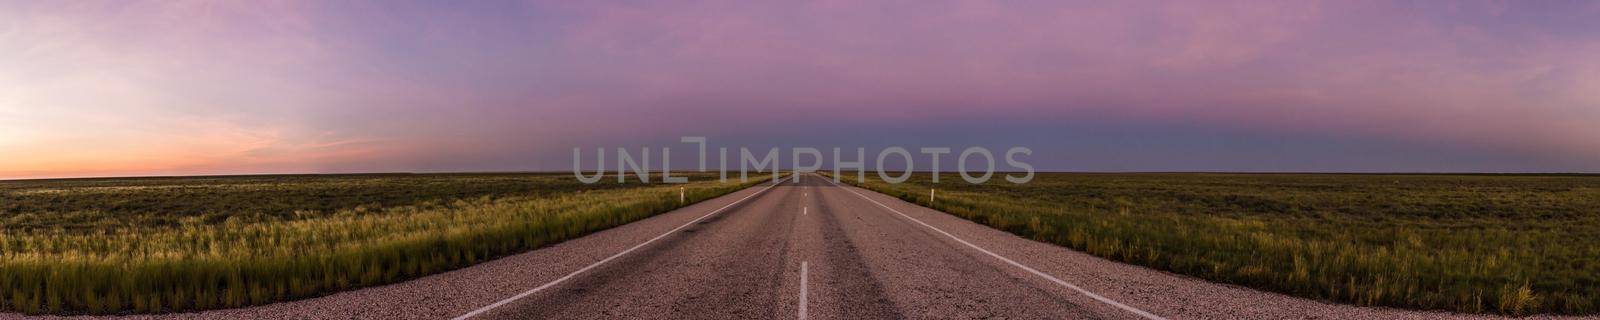 panorama of a straight road through the outback of Australia, after a beautiful sunset